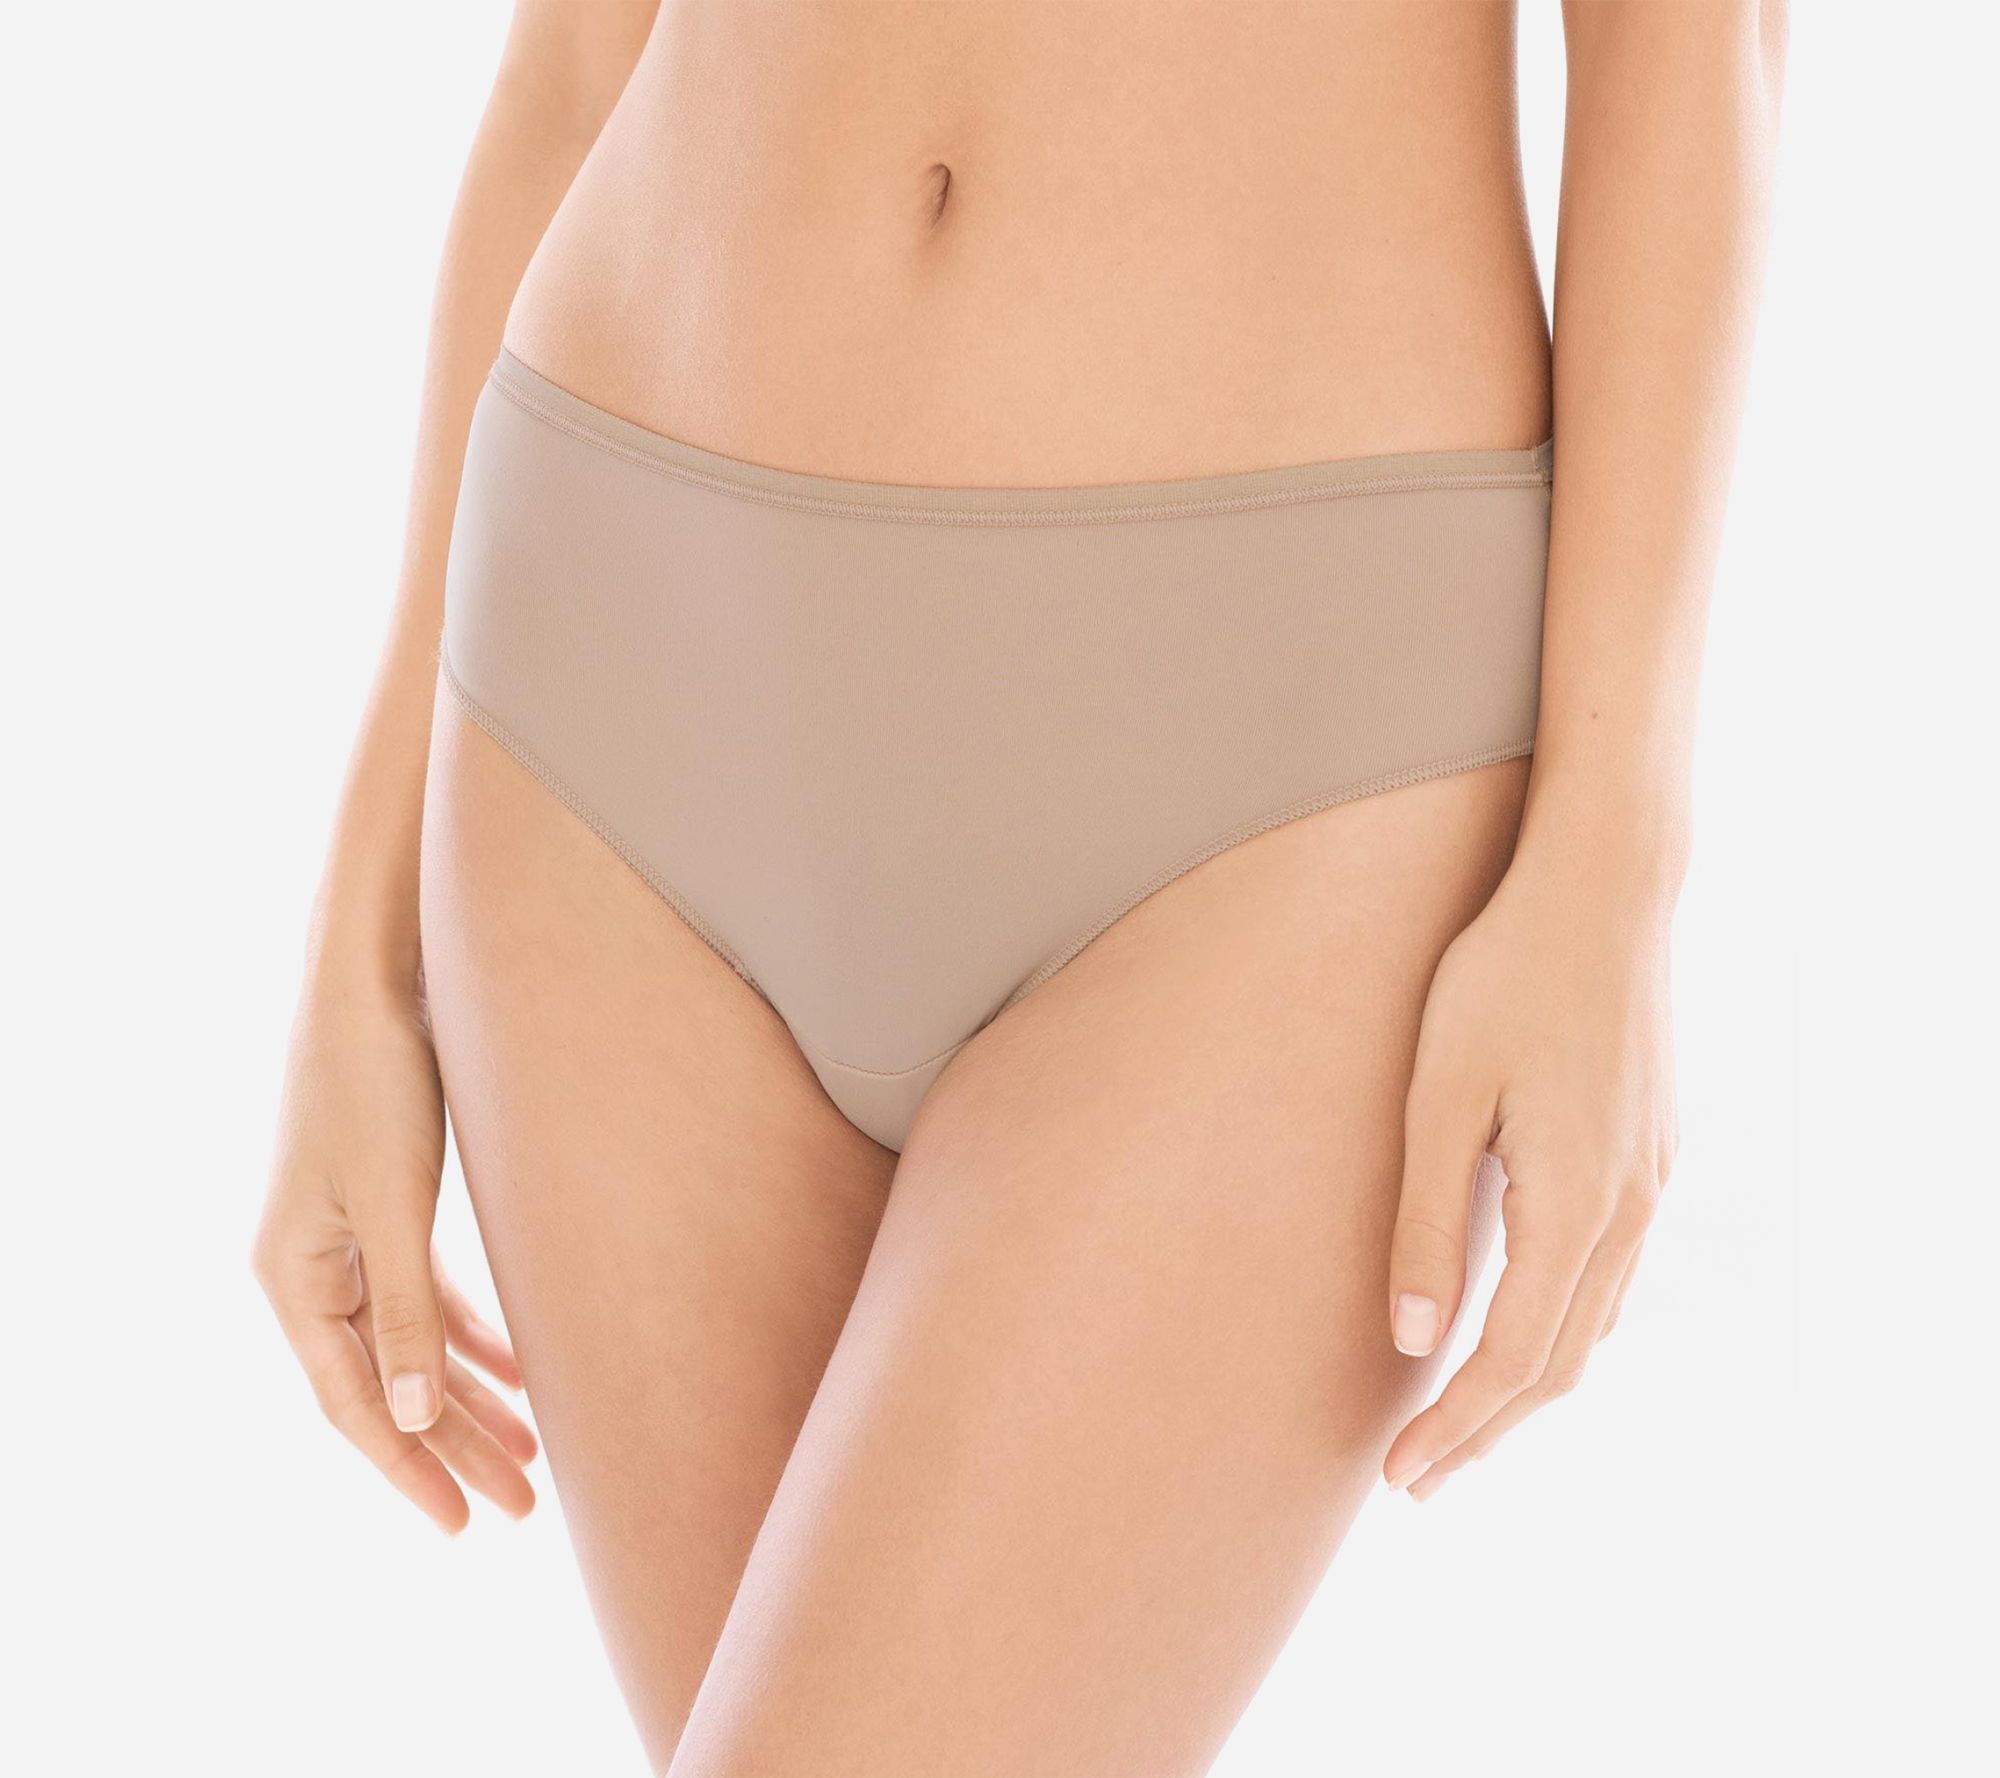 Soma Intimates - Love our Vanishing Edge panties? You can get 5